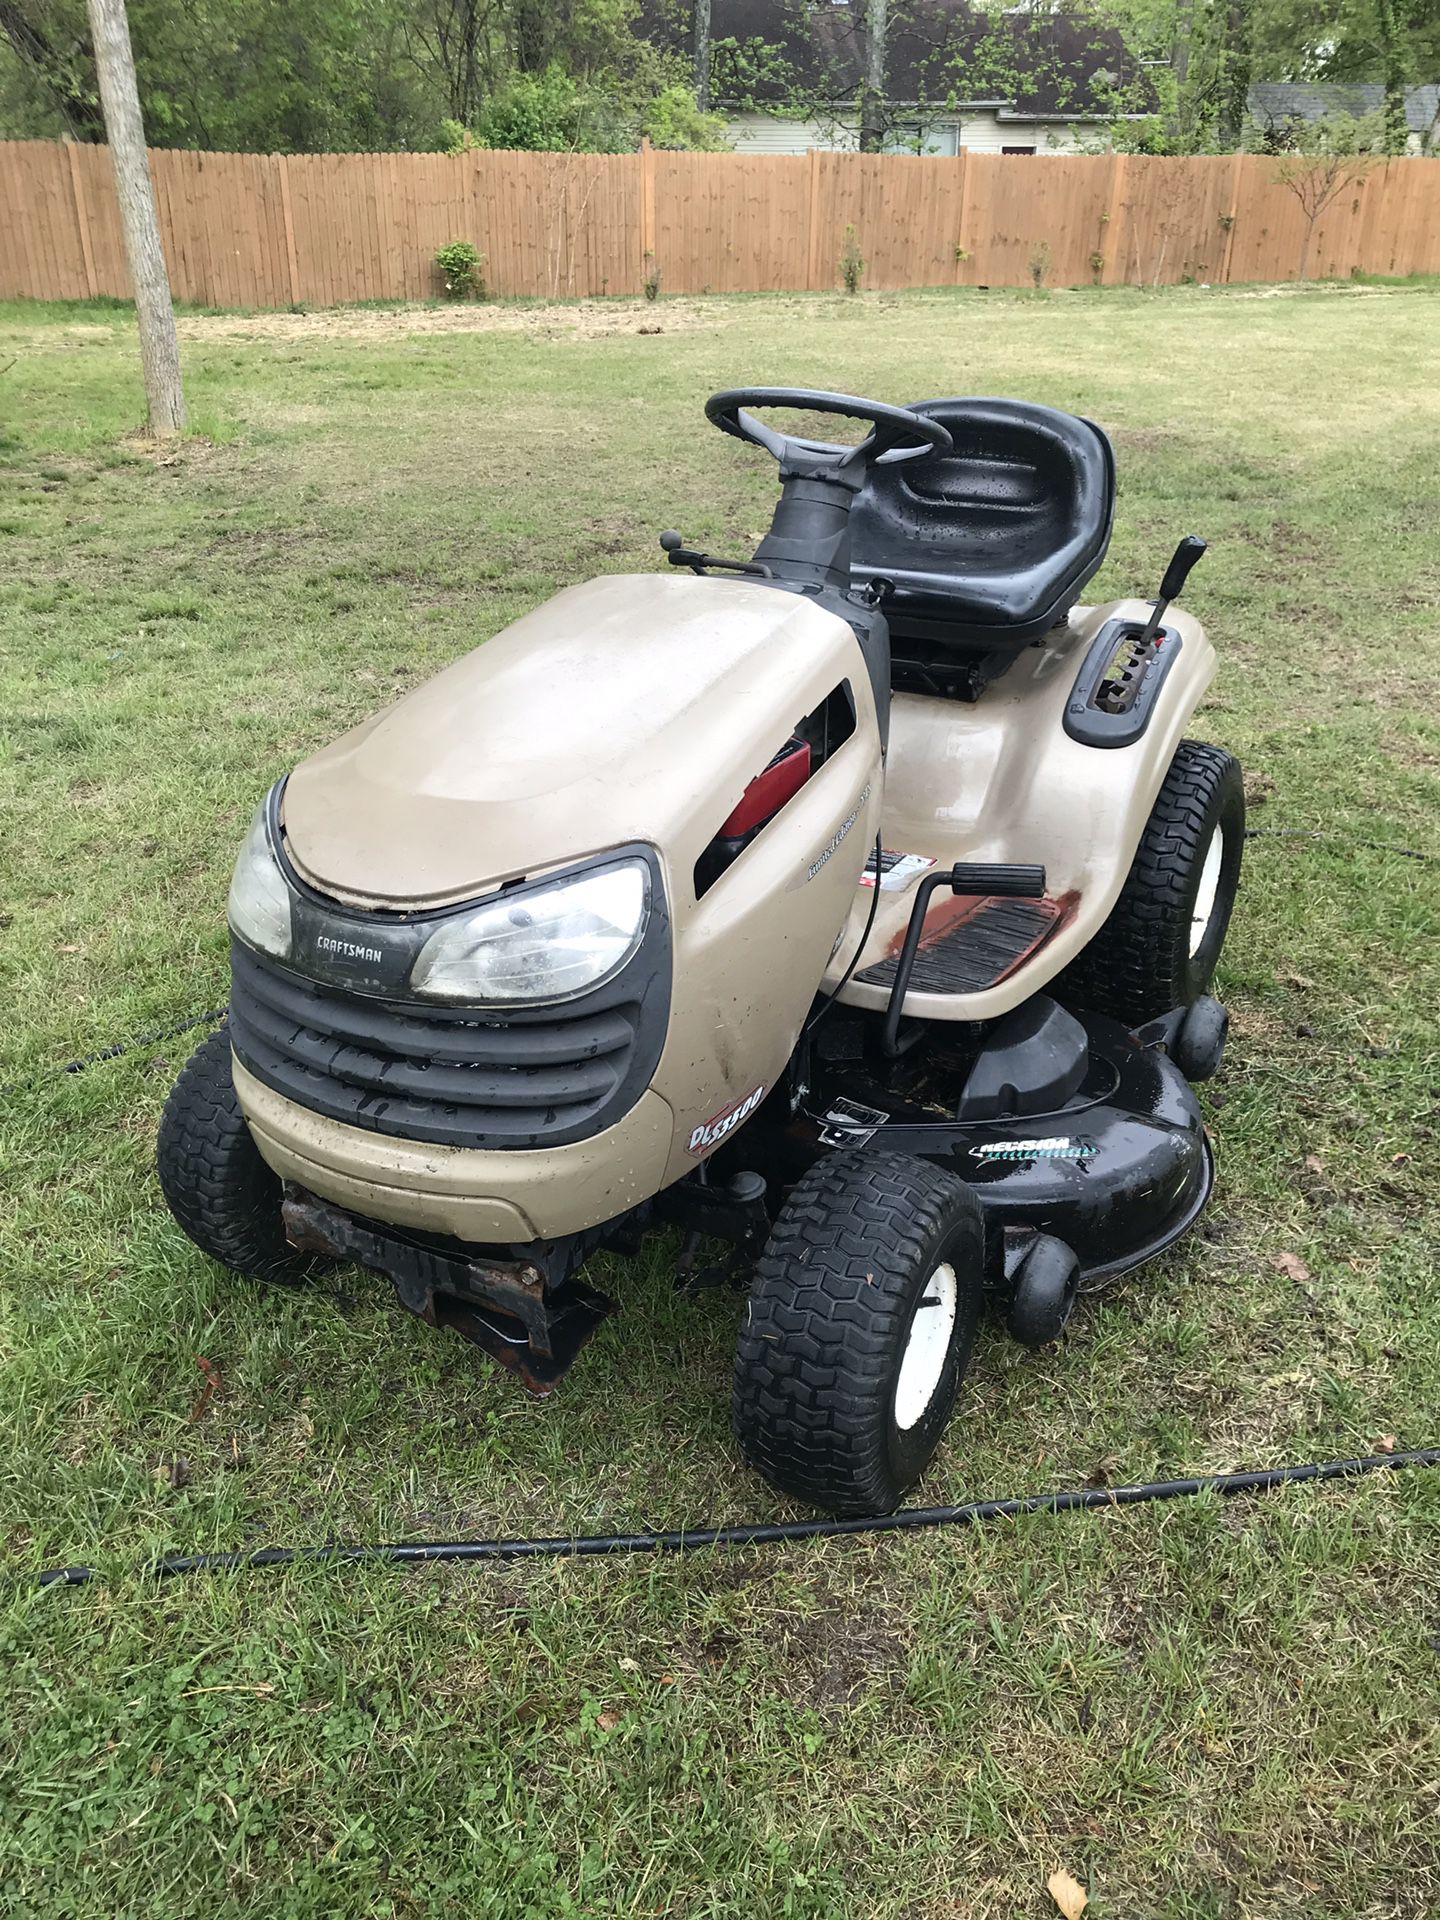 Lawn mower limited edition